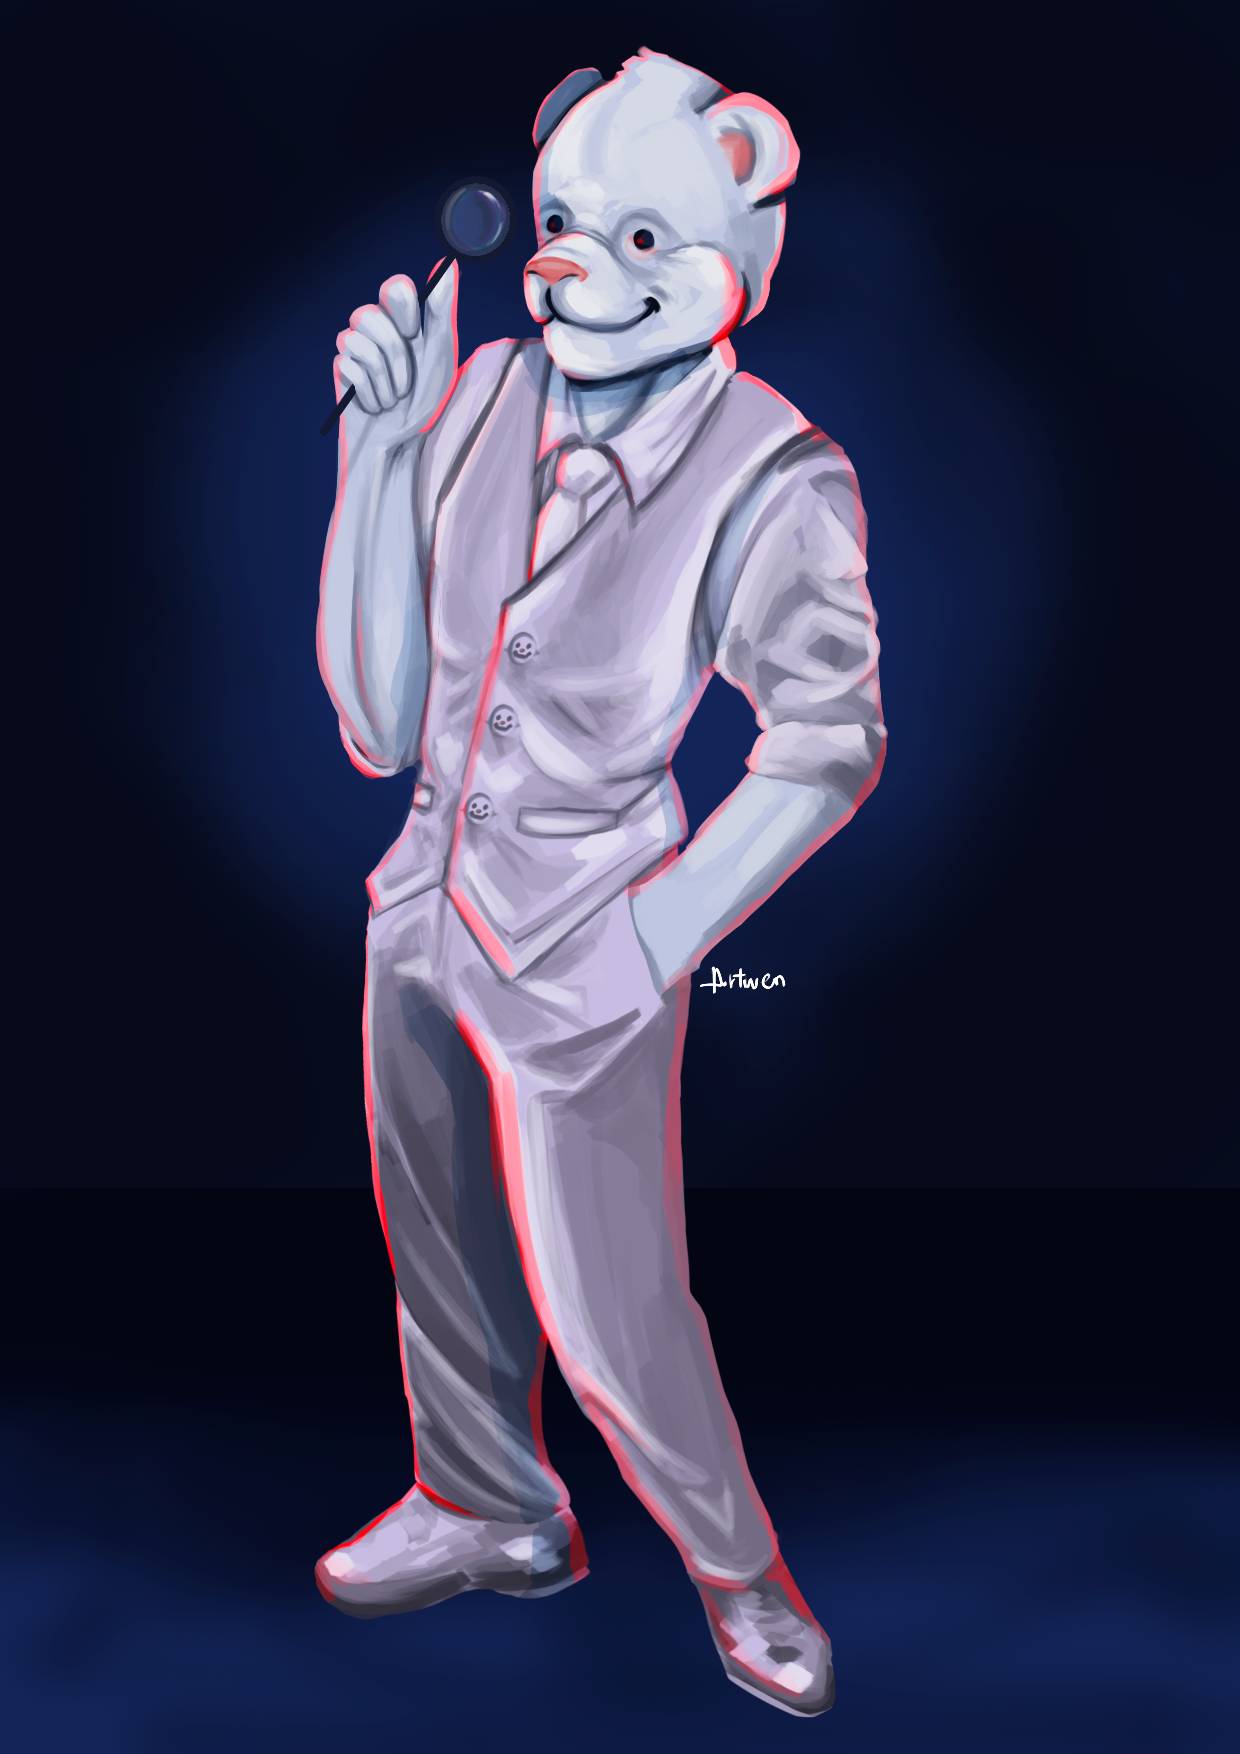 A drawing of Cucurucho in a more realistic depiction. He is a polar bear wearing a white suit minus the jacket and holding a magnifying glass to his eye.